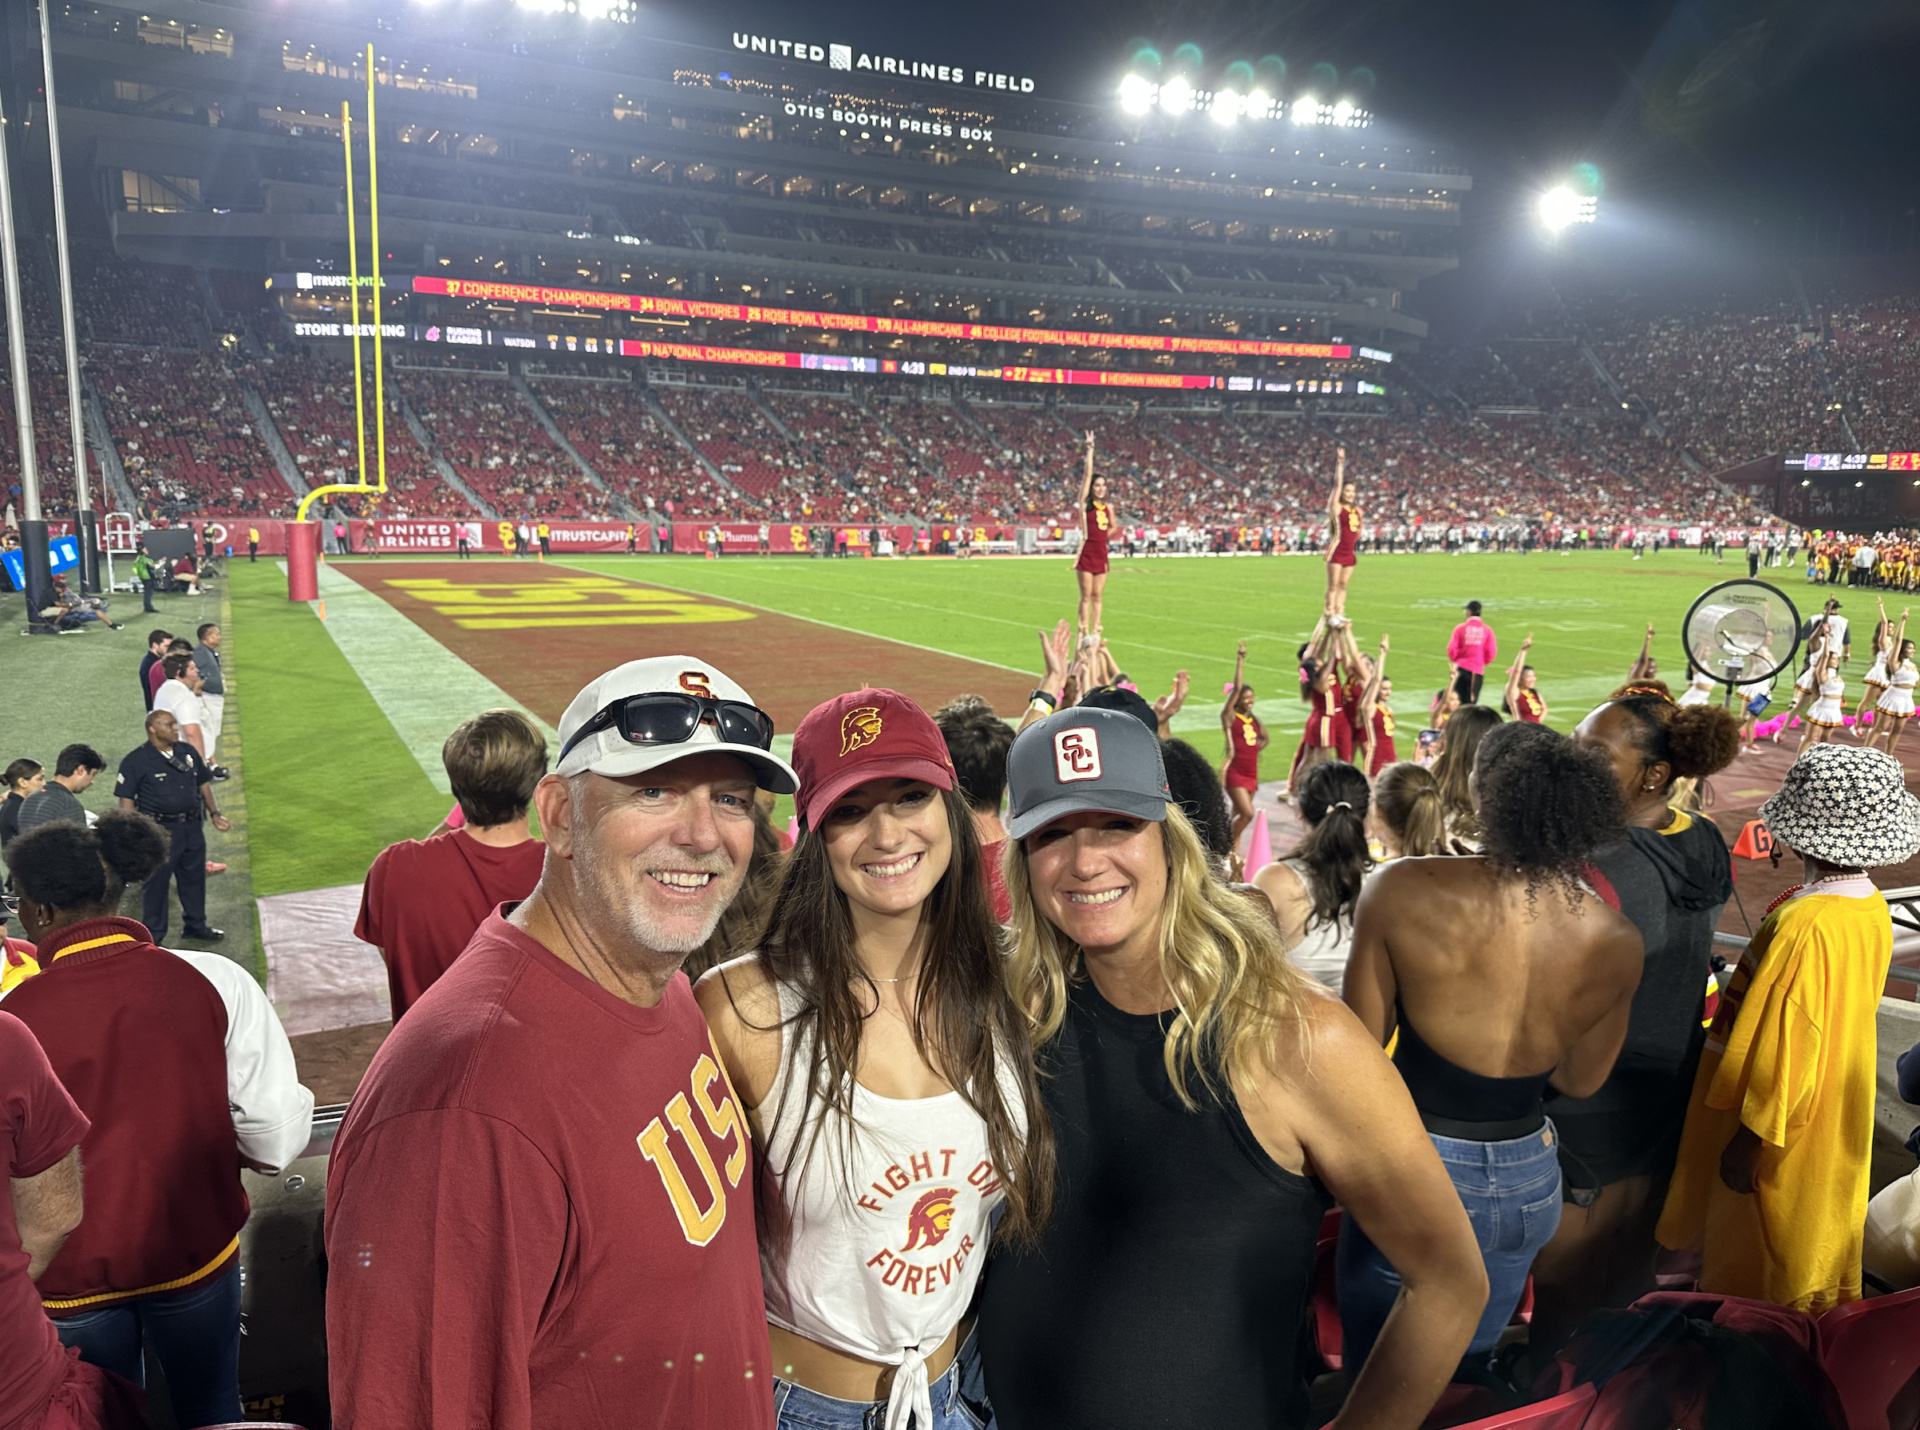 Why I Chose USC: Perspective from a Graduating Senior